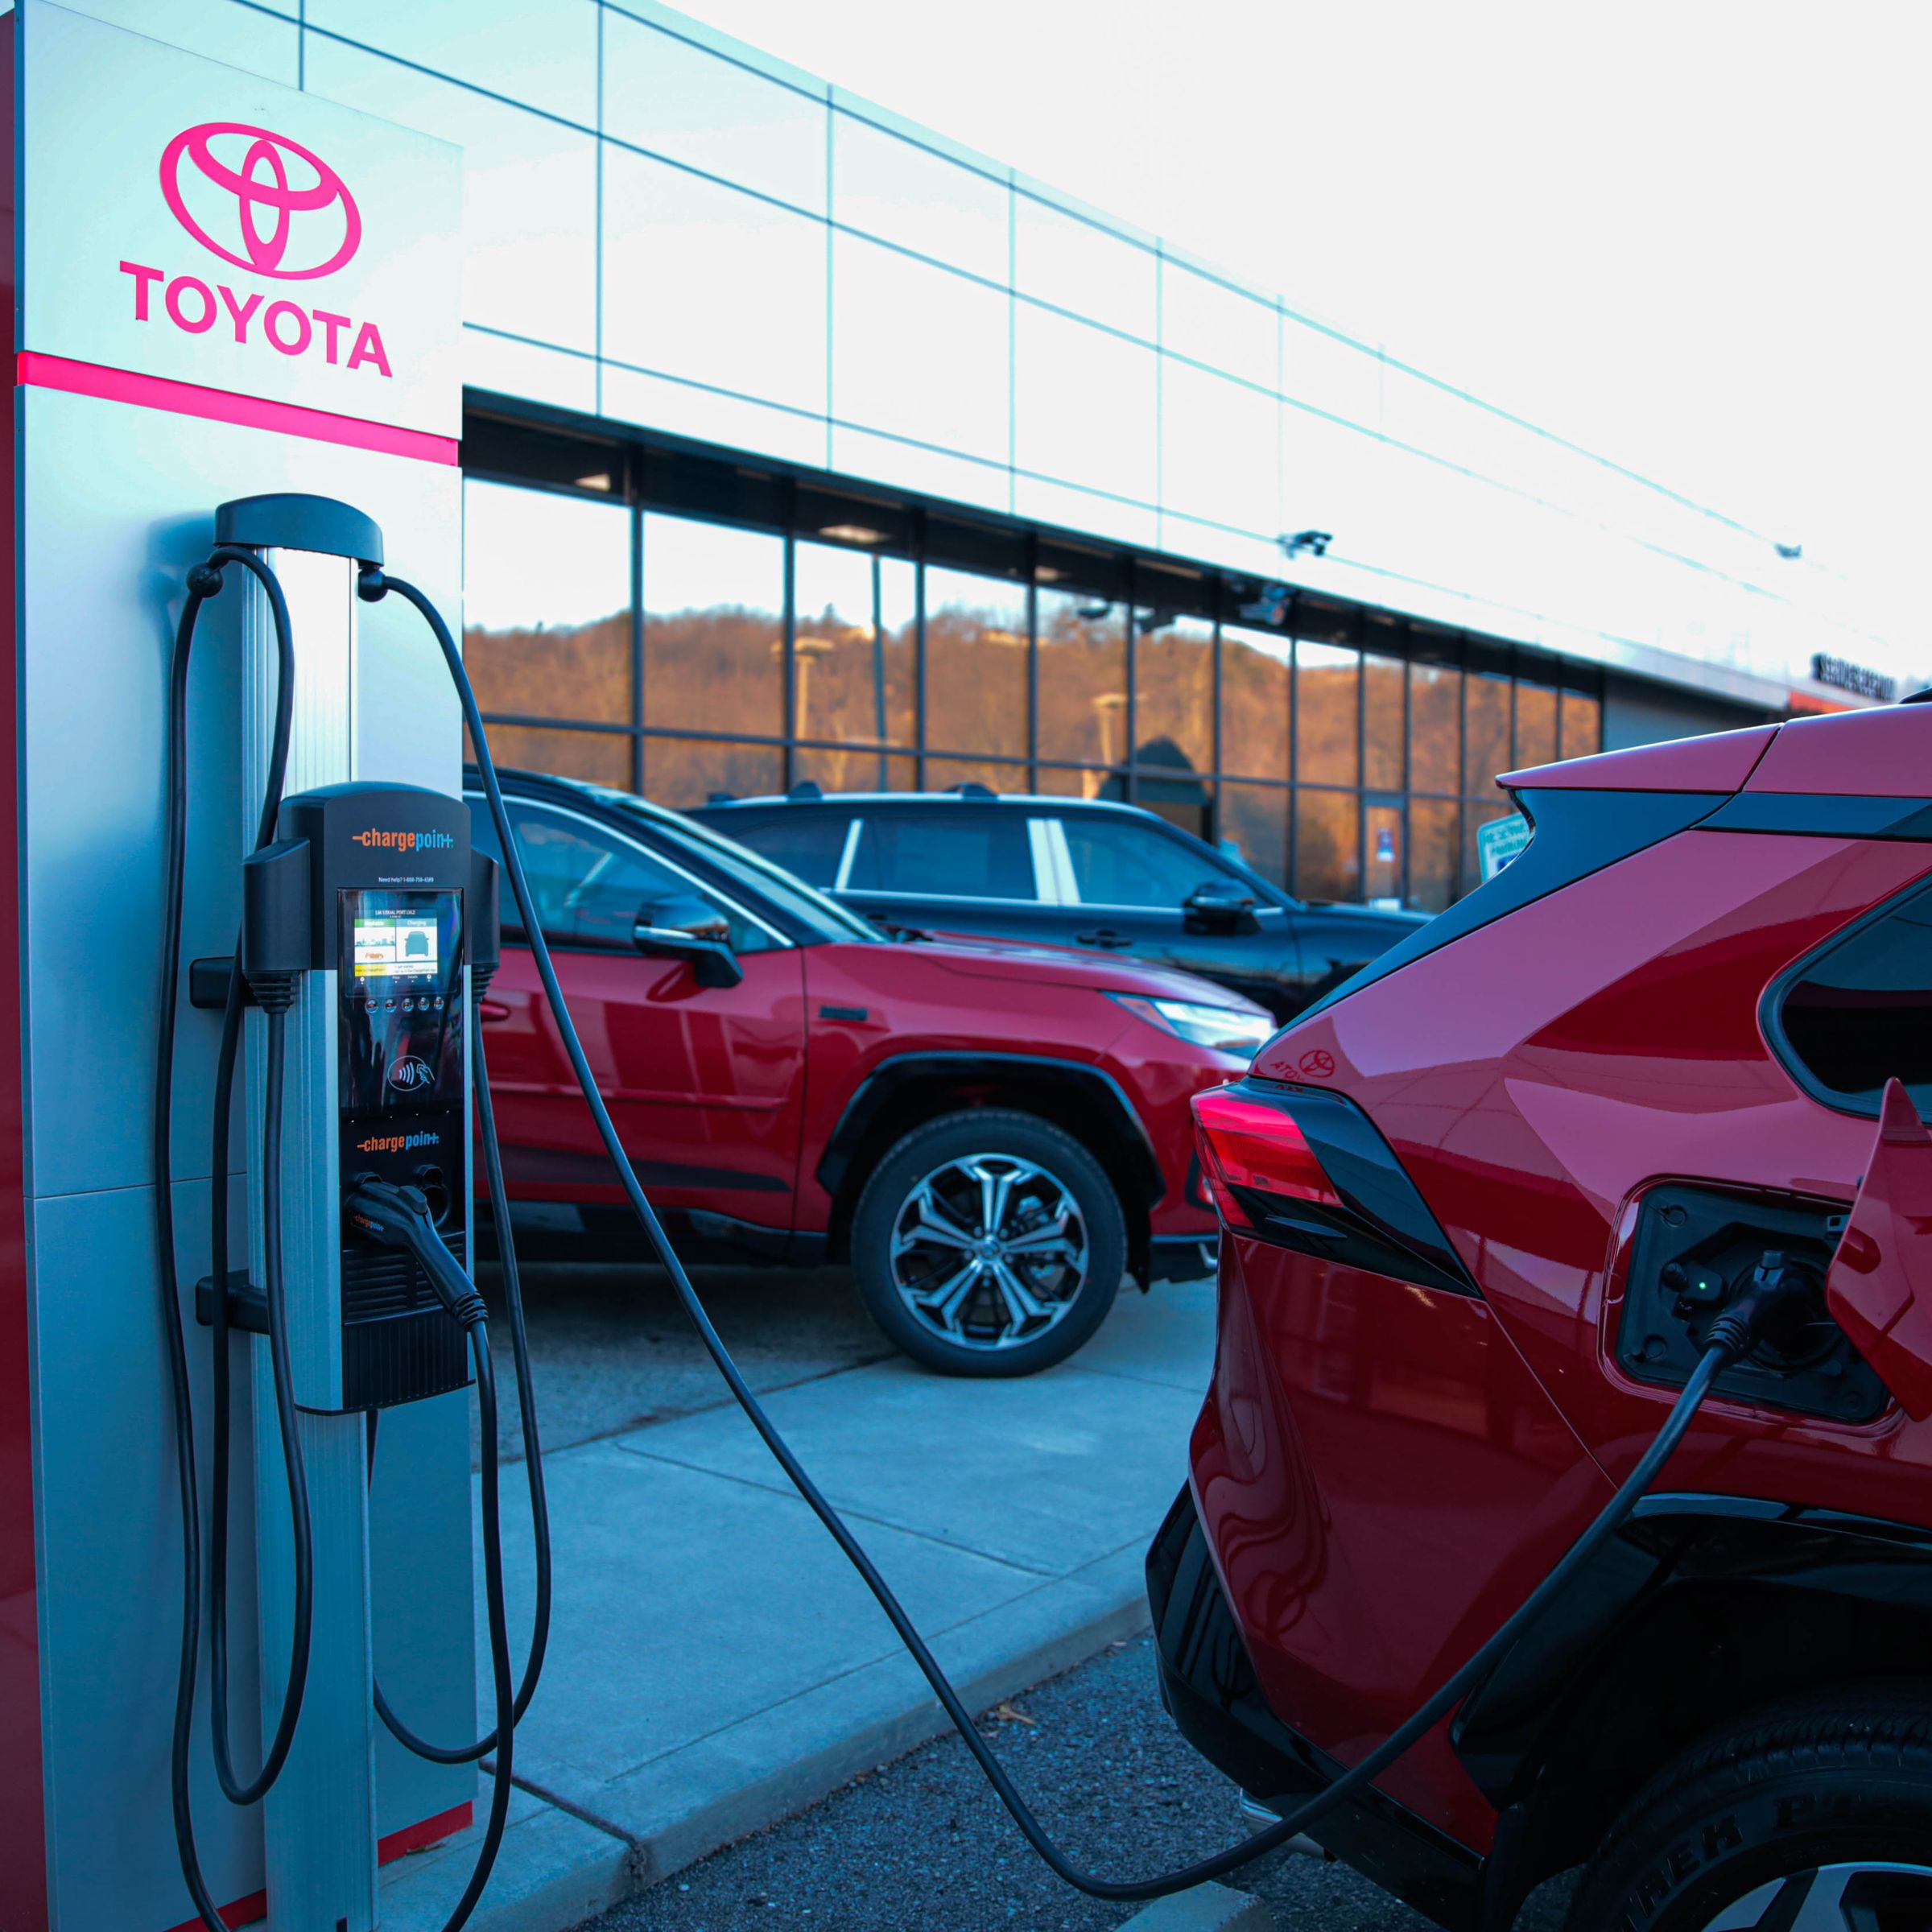 A picture of a Toyota vehicle plugged into a Toyota charging station.